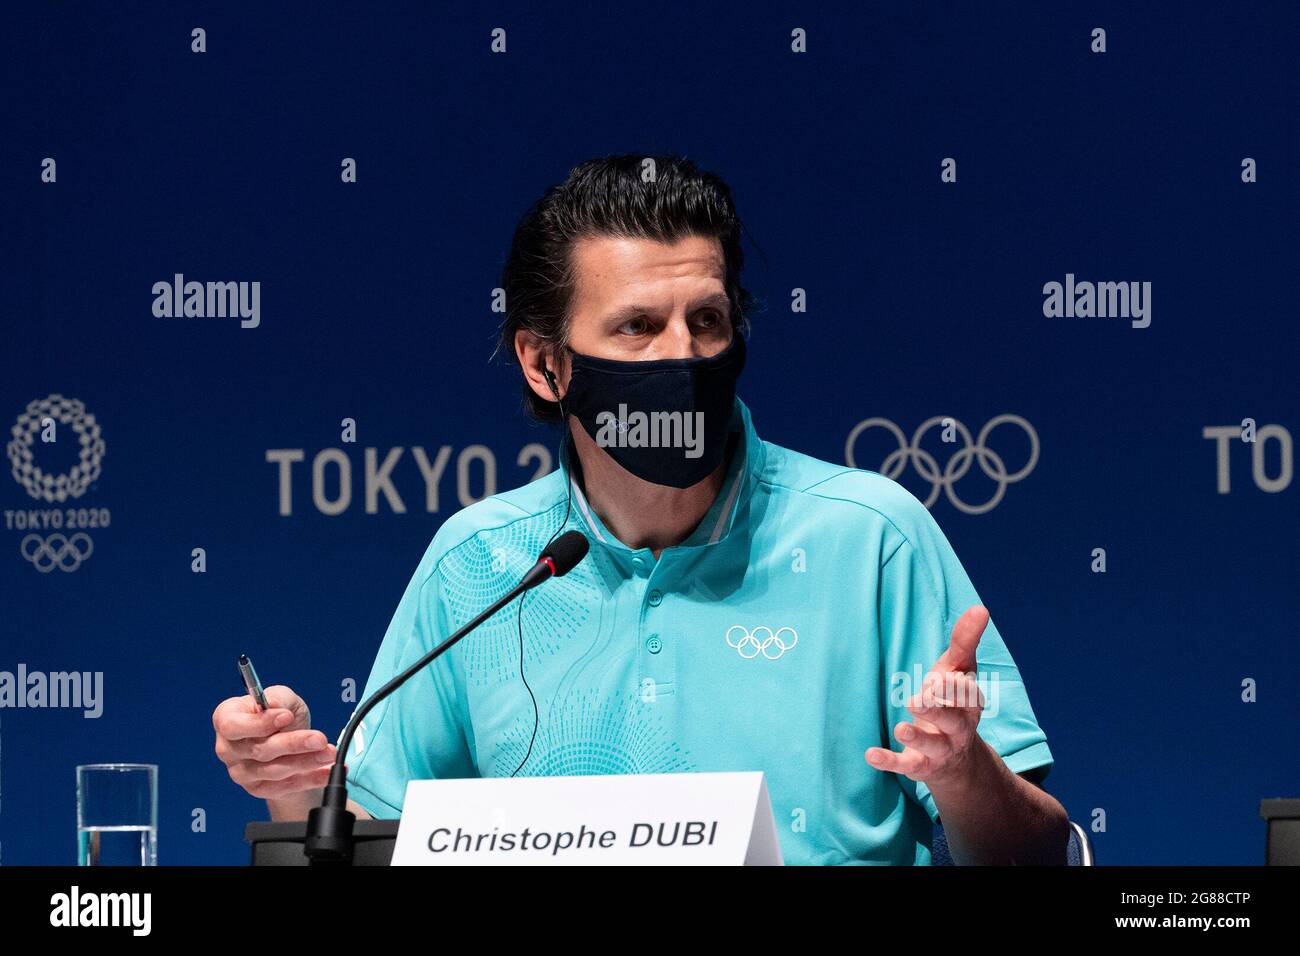 Tokyo, Japan. 18th July, 2021. International Olympic Committee's Olympic Games Executive Director Christophe Dubi attends a press conference at the Main Press Center (MPC) of Tokyo 2020 in Tokyo, Japan, July 18, 2021. Credit: Du Yu/Xinhua/Alamy Live News Stock Photo